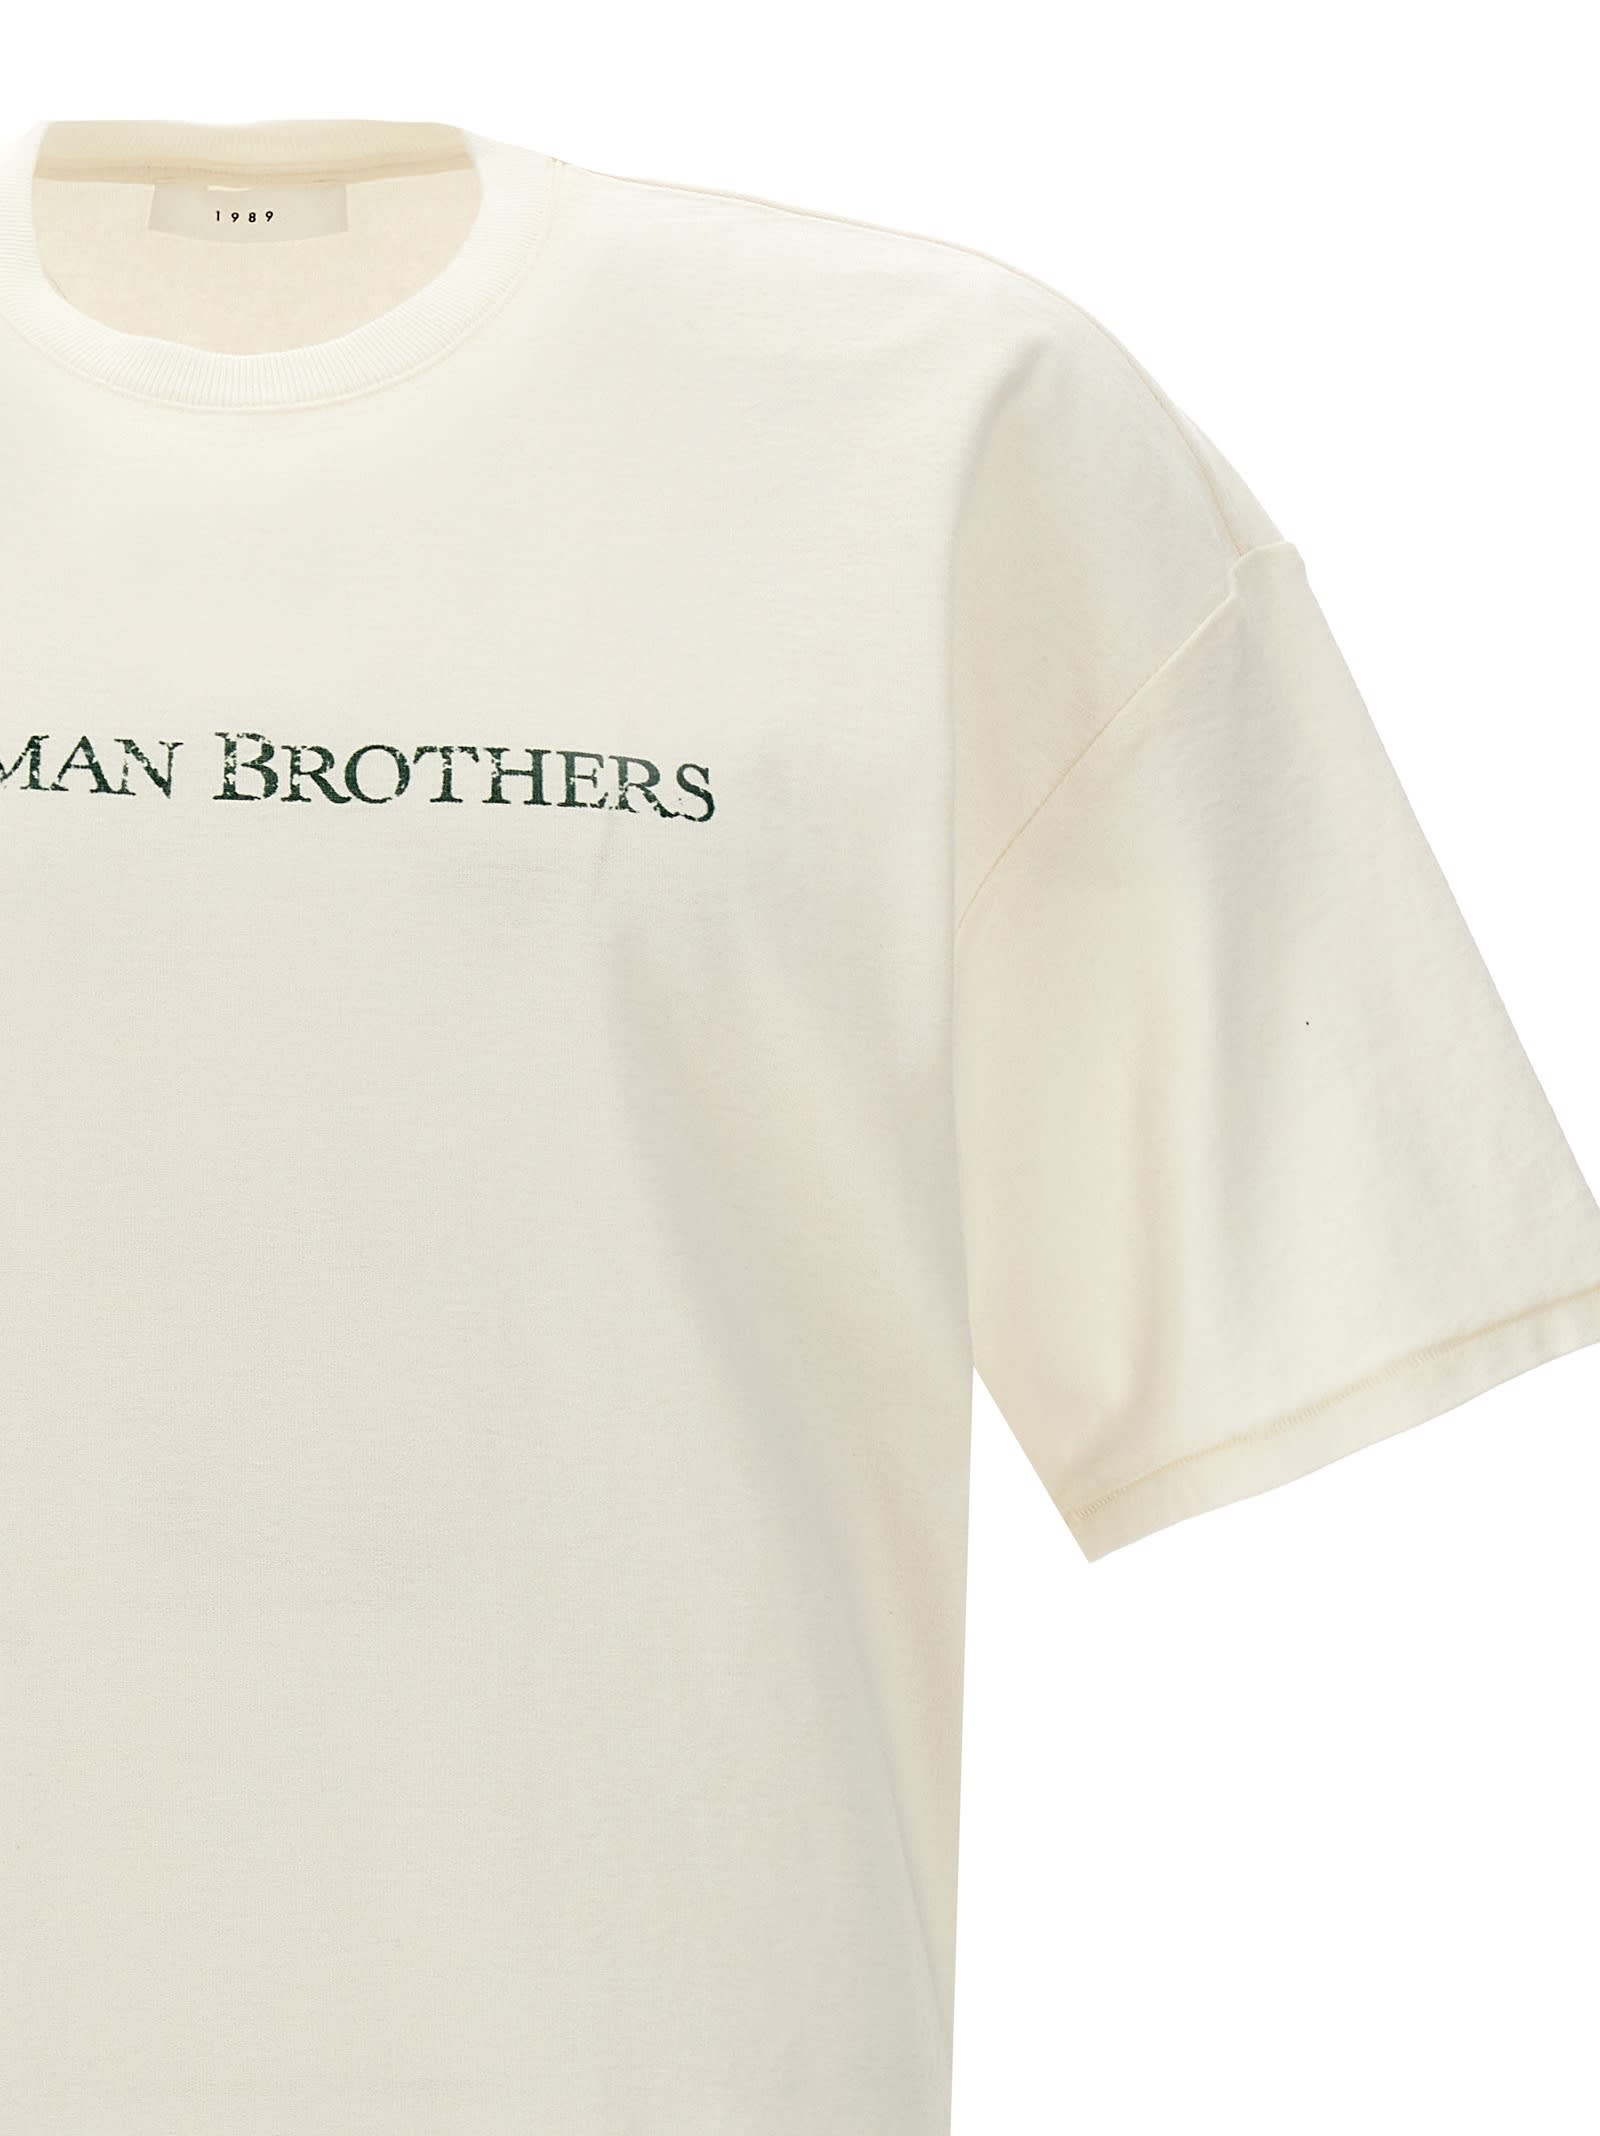 Shop 1989 Studio Lehman Brothers T-shirt In White